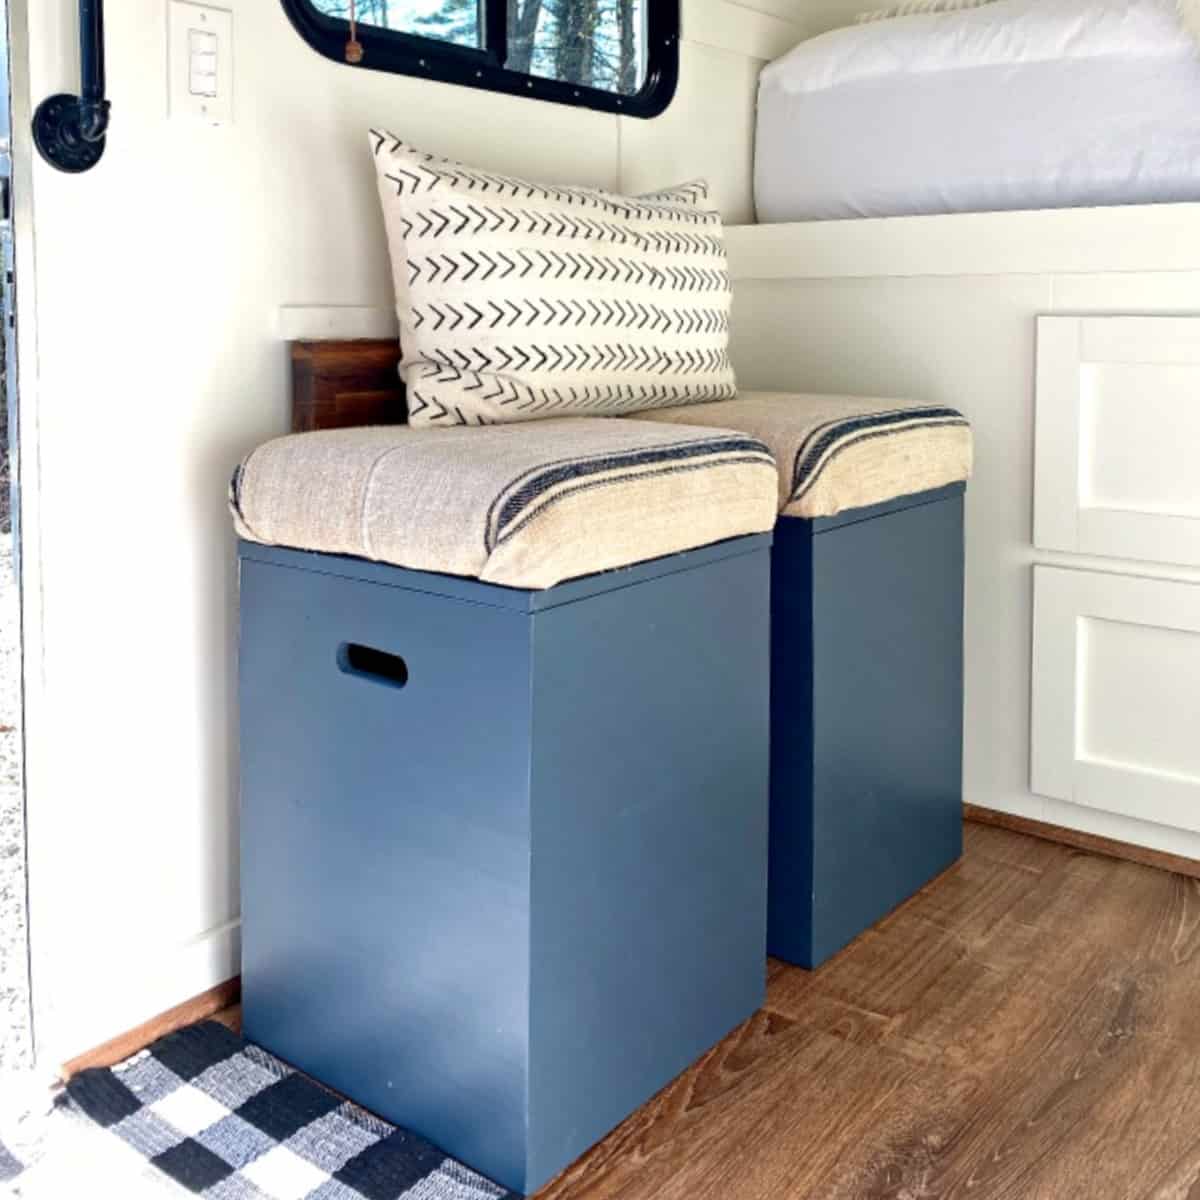 2 navy DIY storage ottomans lined up against wall in RV